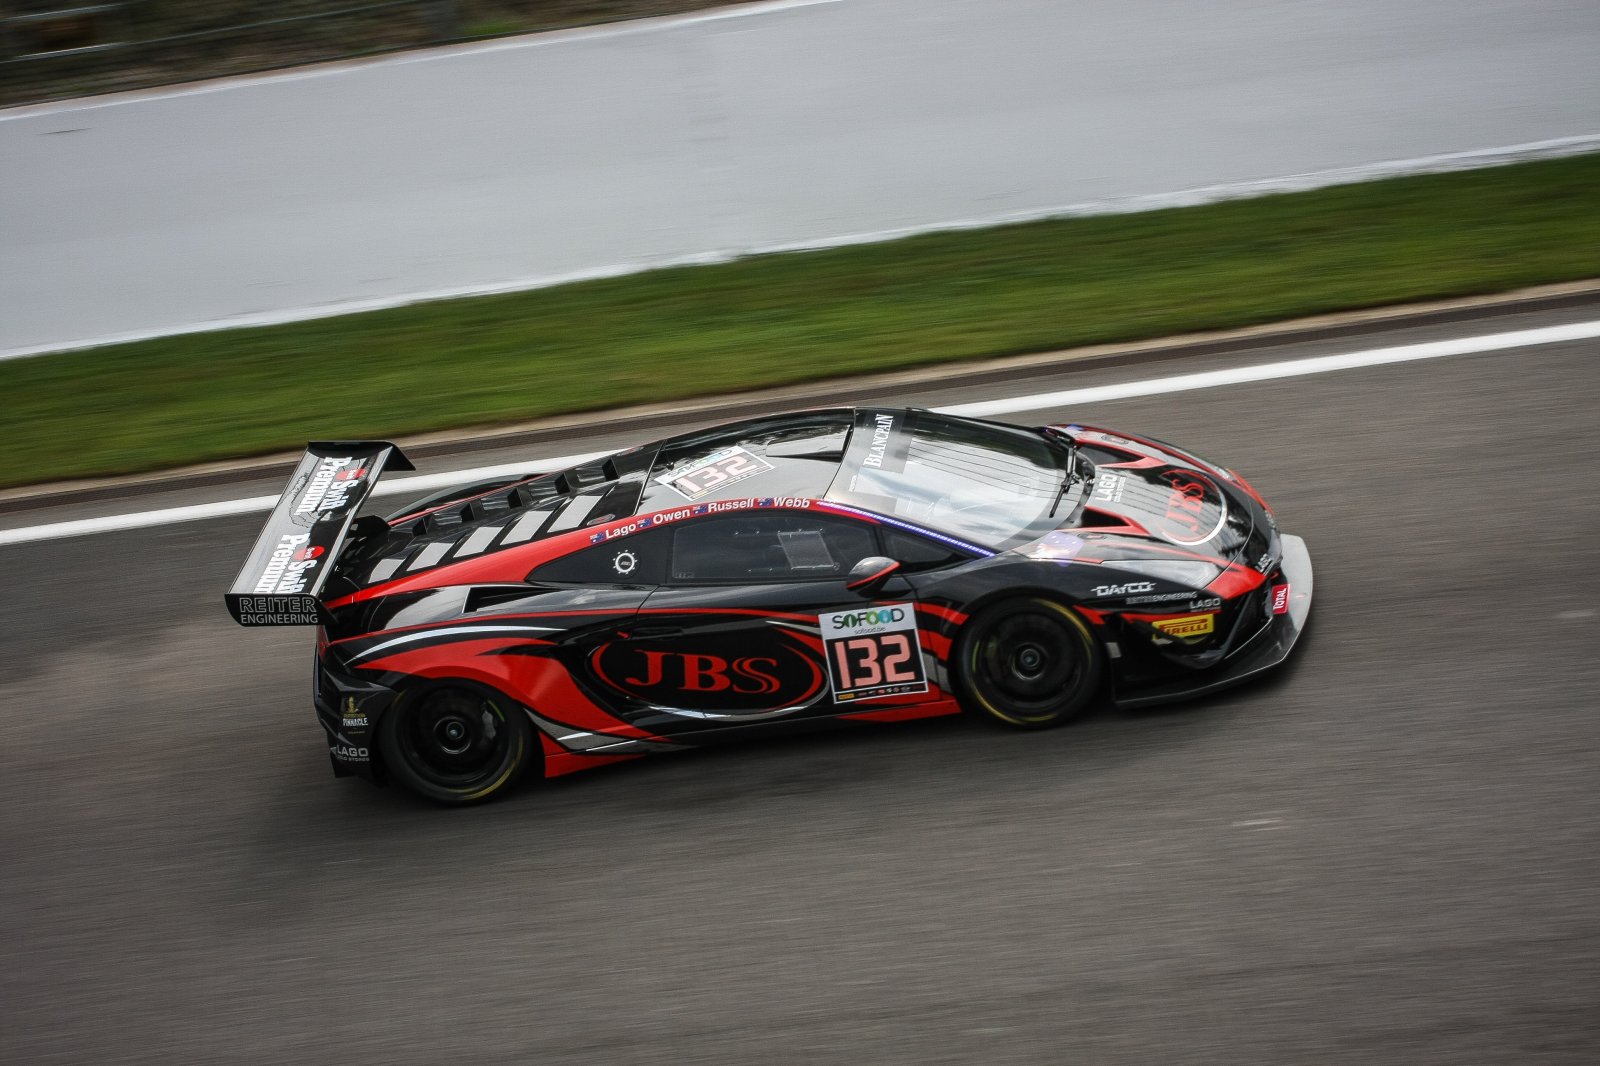 Bronze Test kicks off track action at 2016 Total 24 Hours of Spa 